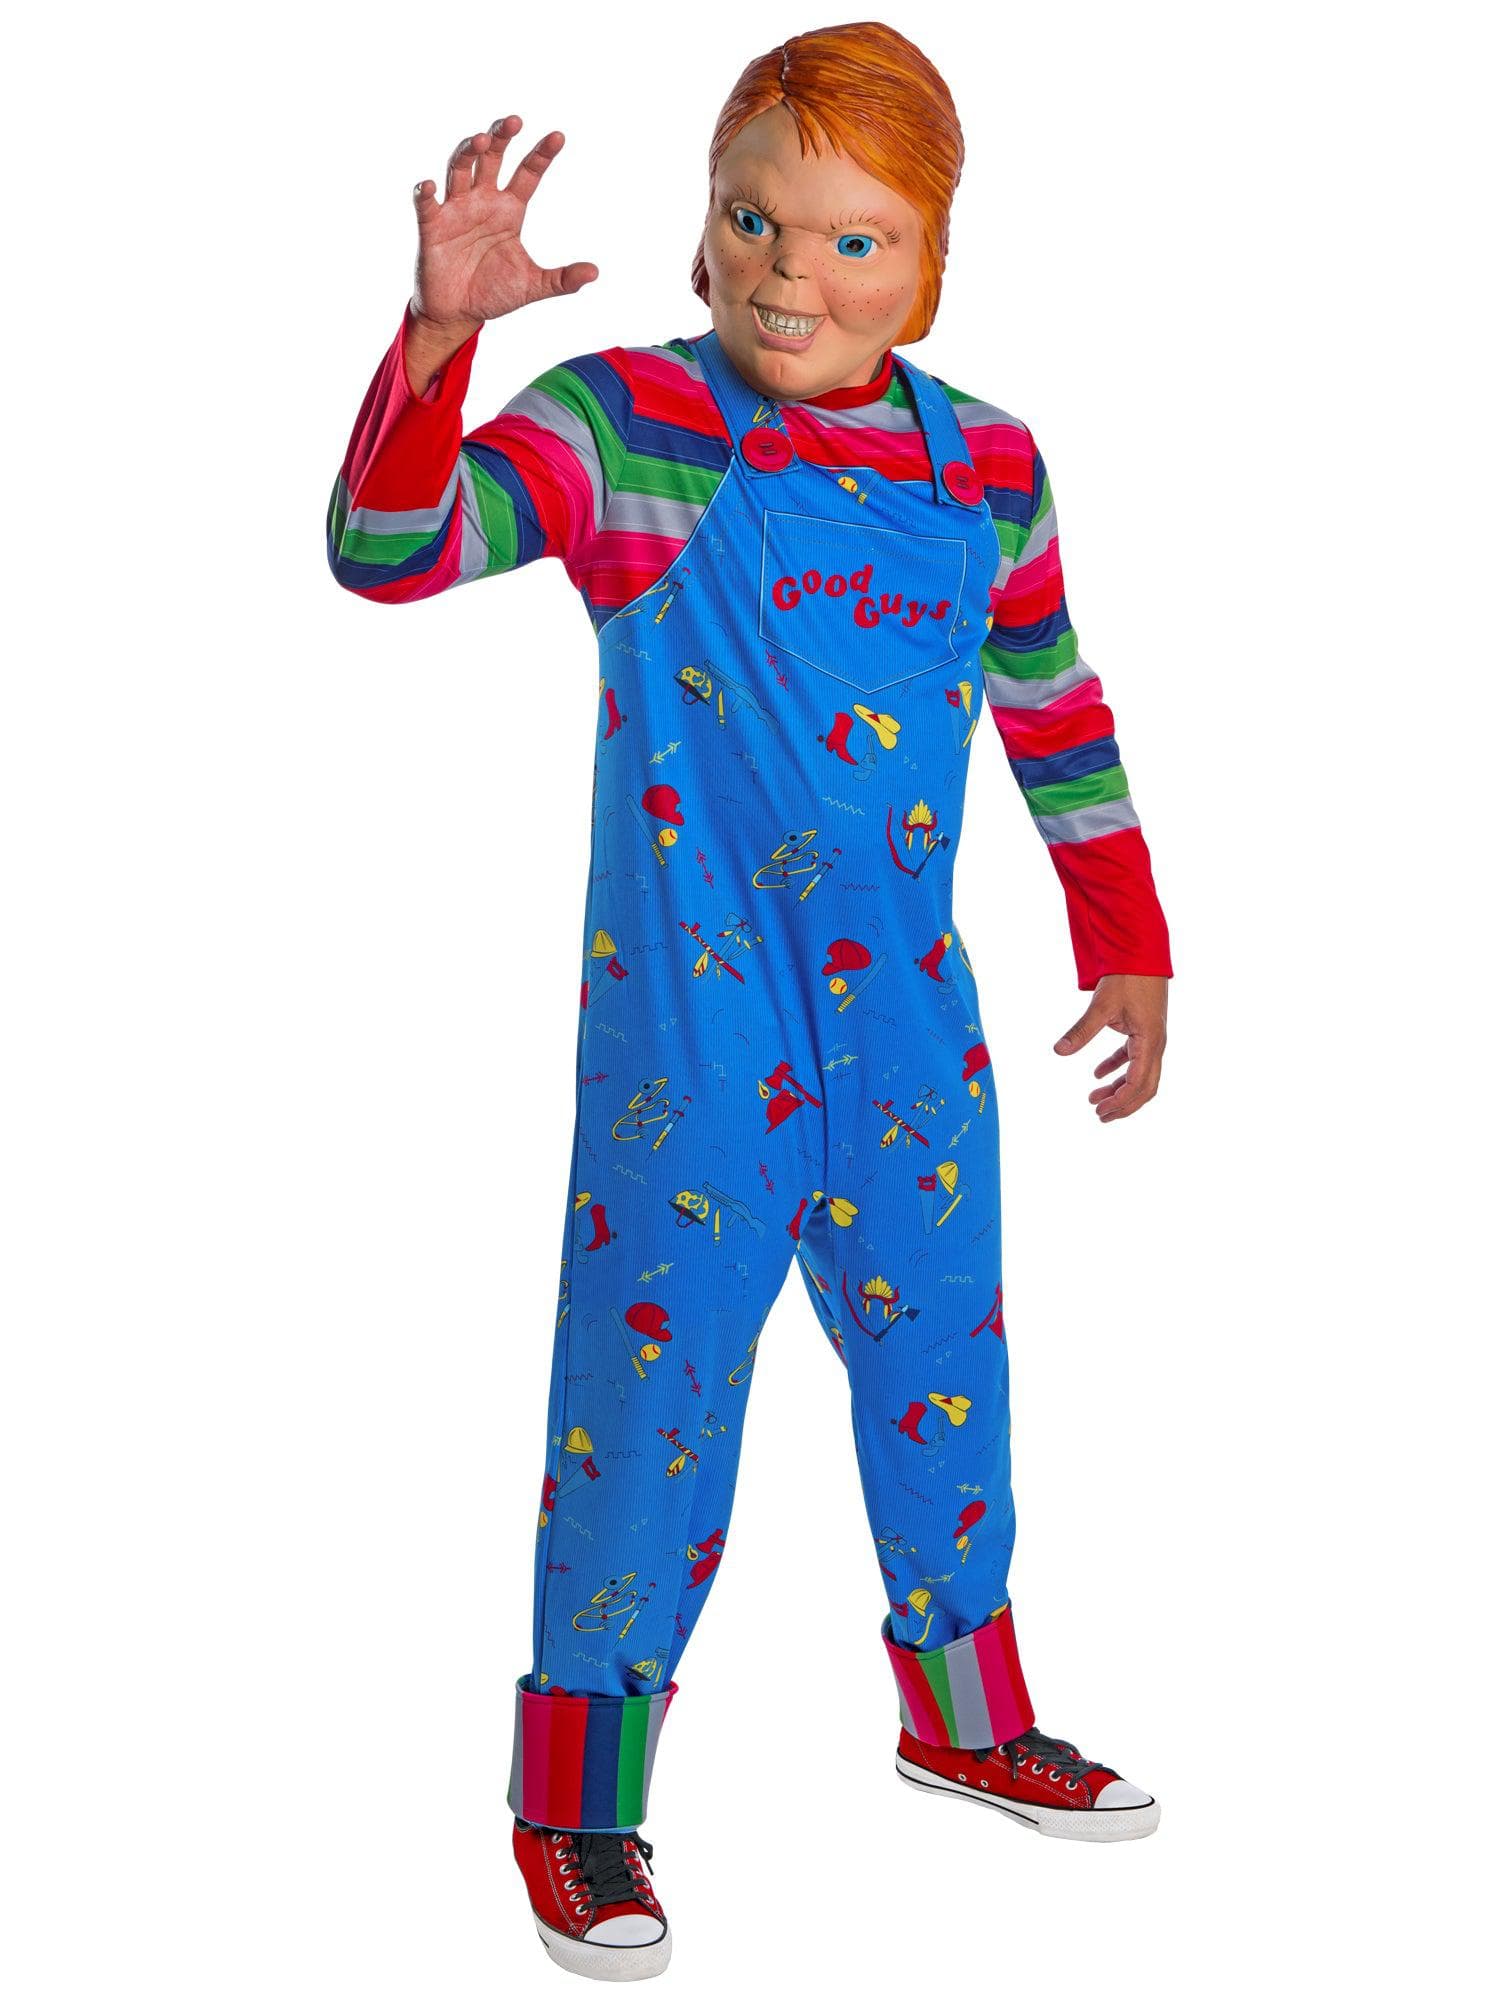 Adult Child's Play 2 Chucky Costume - costumes.com